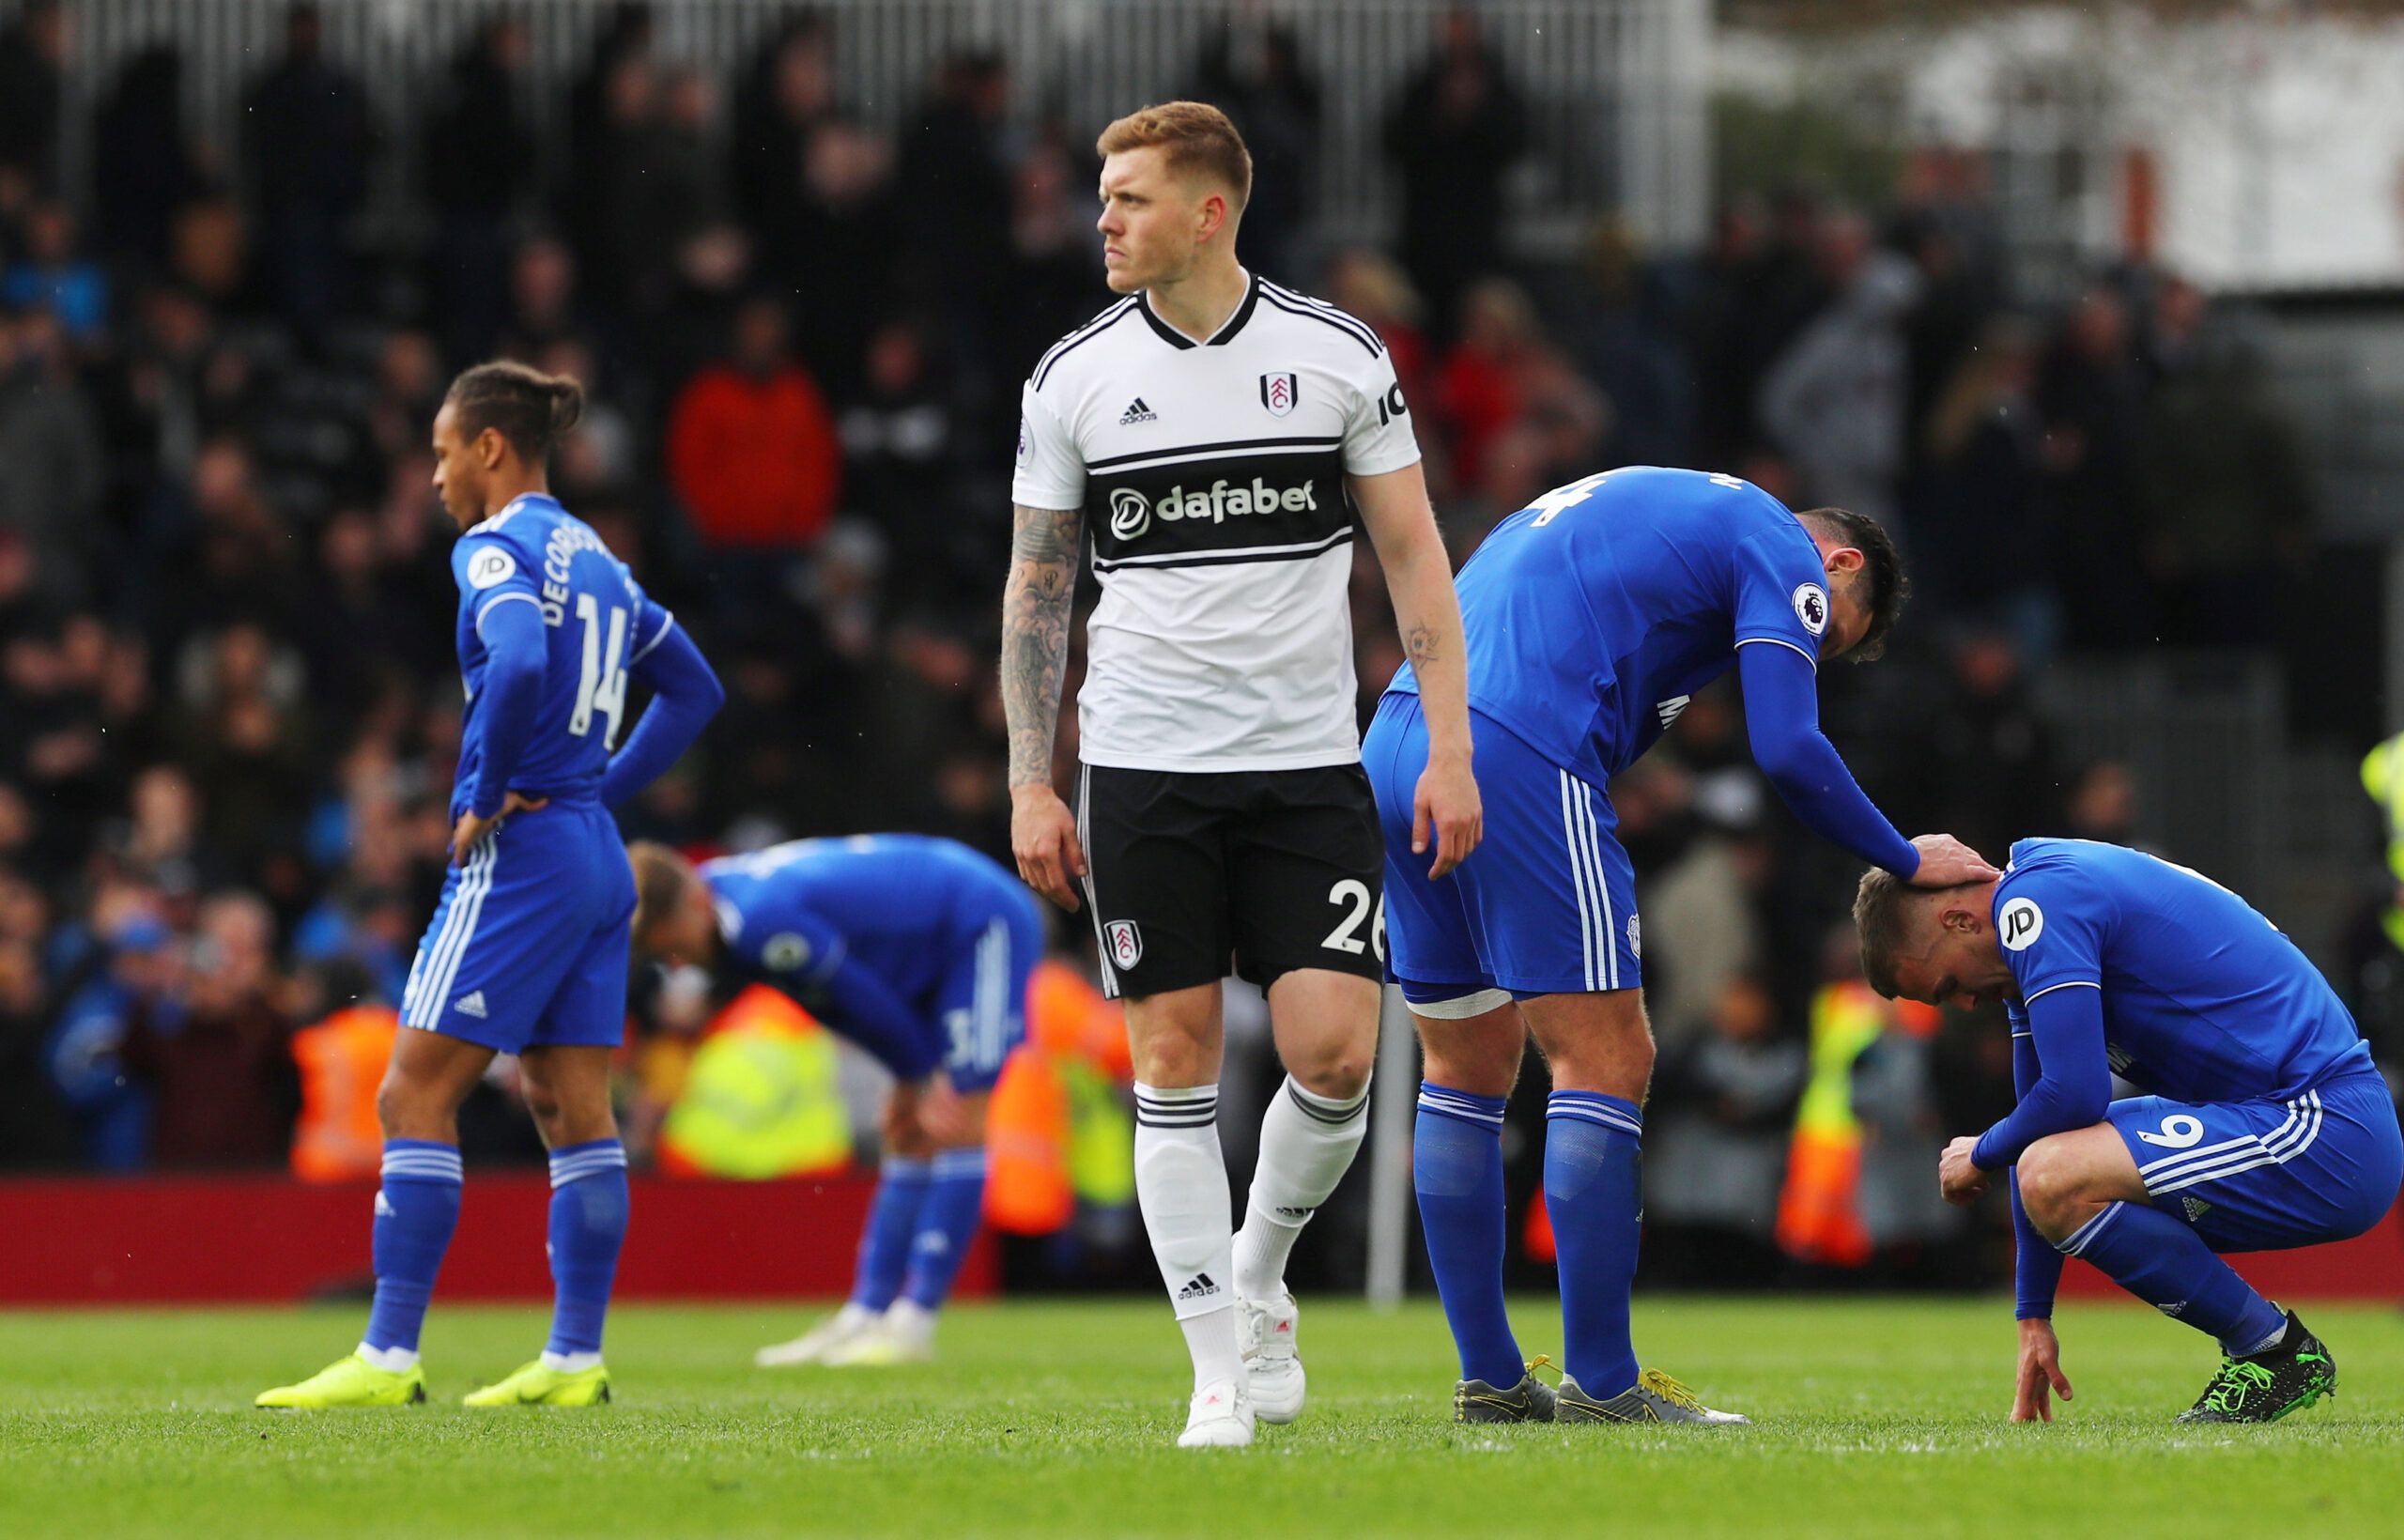 Soccer Football - Premier League - Fulham v Cardiff City - Craven Cottage, London, Britain - April 27, 2019  Fulham's Alfie Mawson looks on after the match as Cardiff City players look dejected          REUTERS/Eddie Keogh  EDITORIAL USE ONLY. No use with unauthorized audio, video, data, fixture lists, club/league logos or 